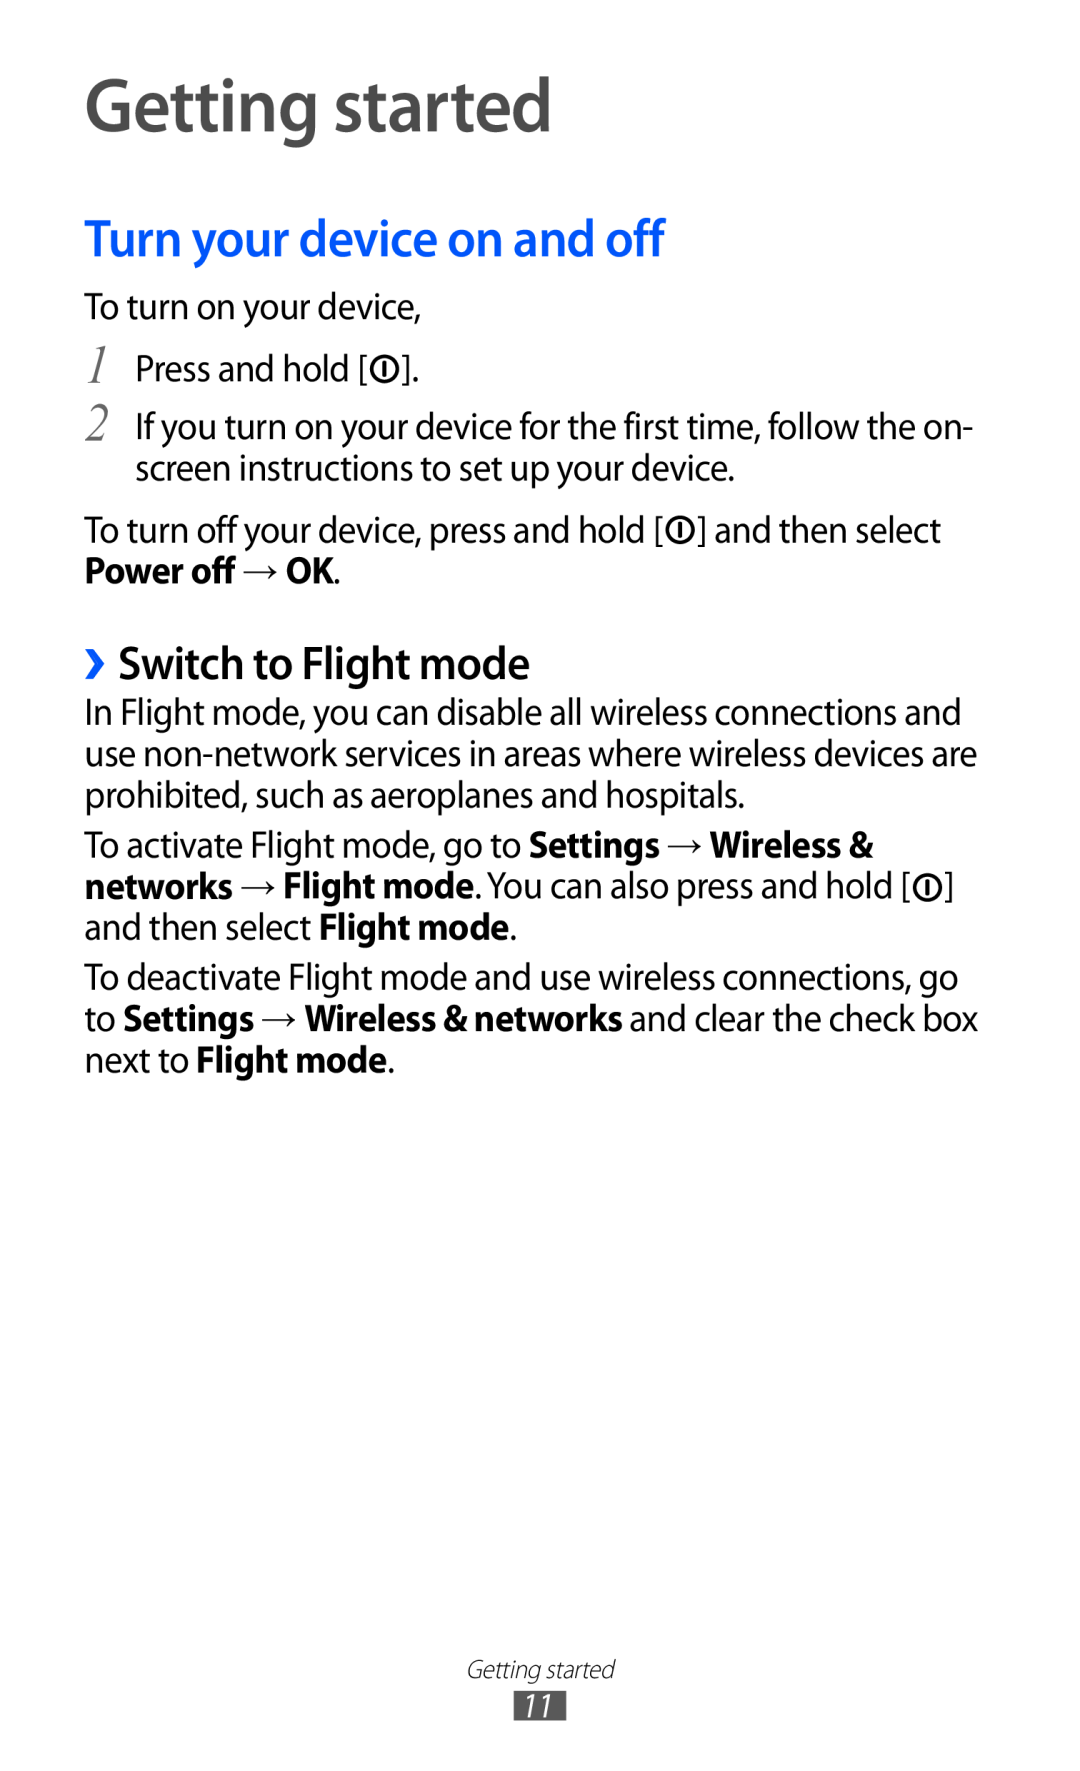 Samsung GT-P7510 user manual Getting started, Turn your device on and off, ››Switch to Flight mode 